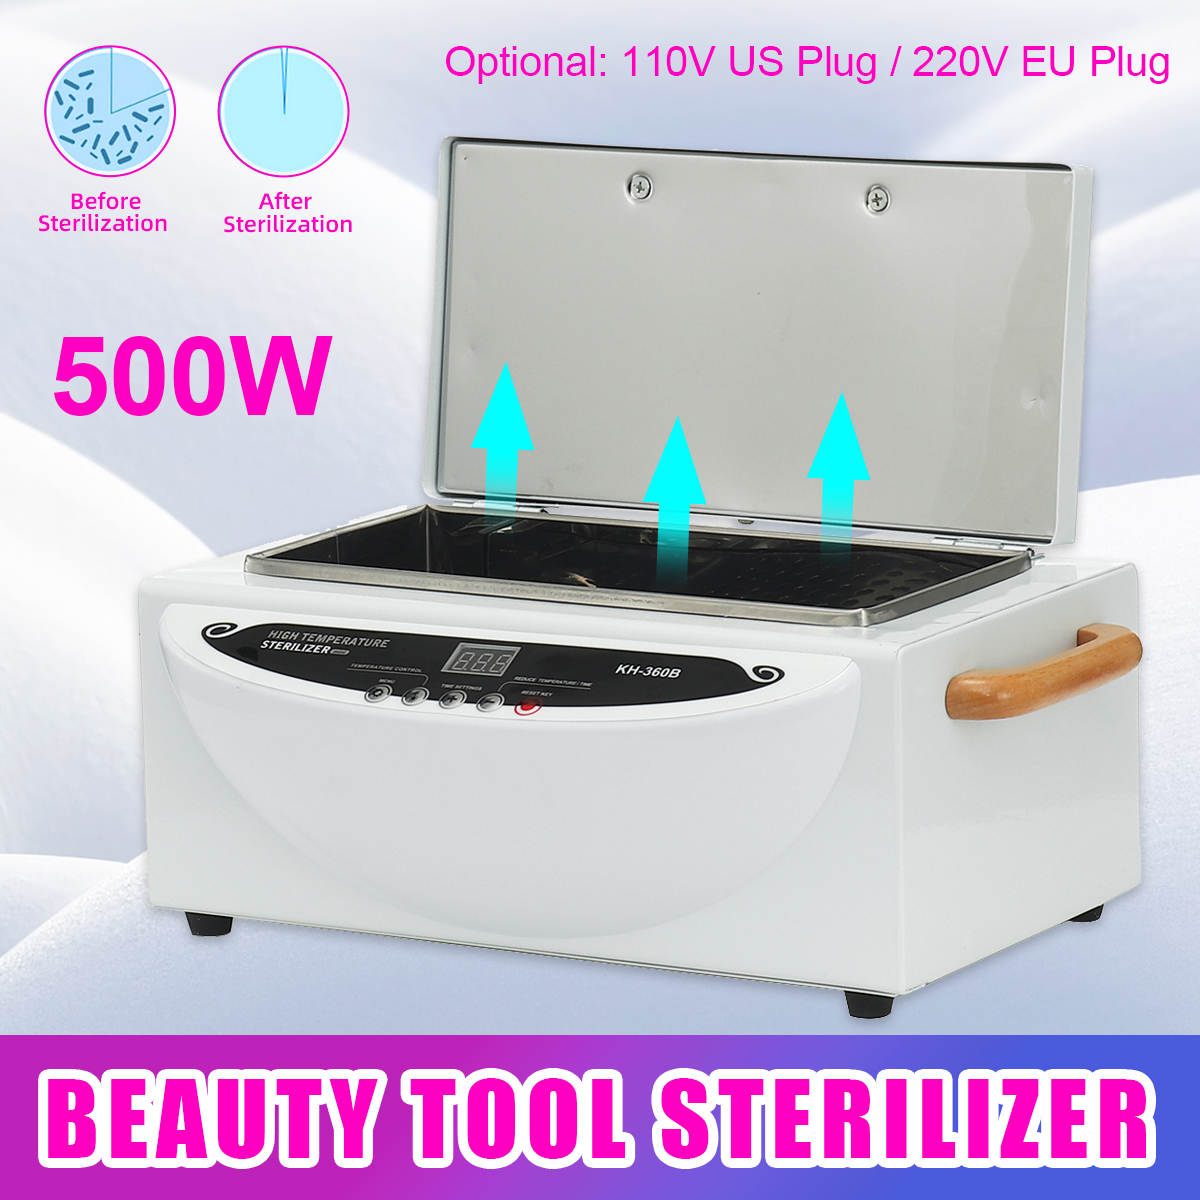 500W-110220V-Spa-Sterilizer-Beauty-Manicure-Nail-Tool-Cabinet-Disinfection-Box-1679830-1